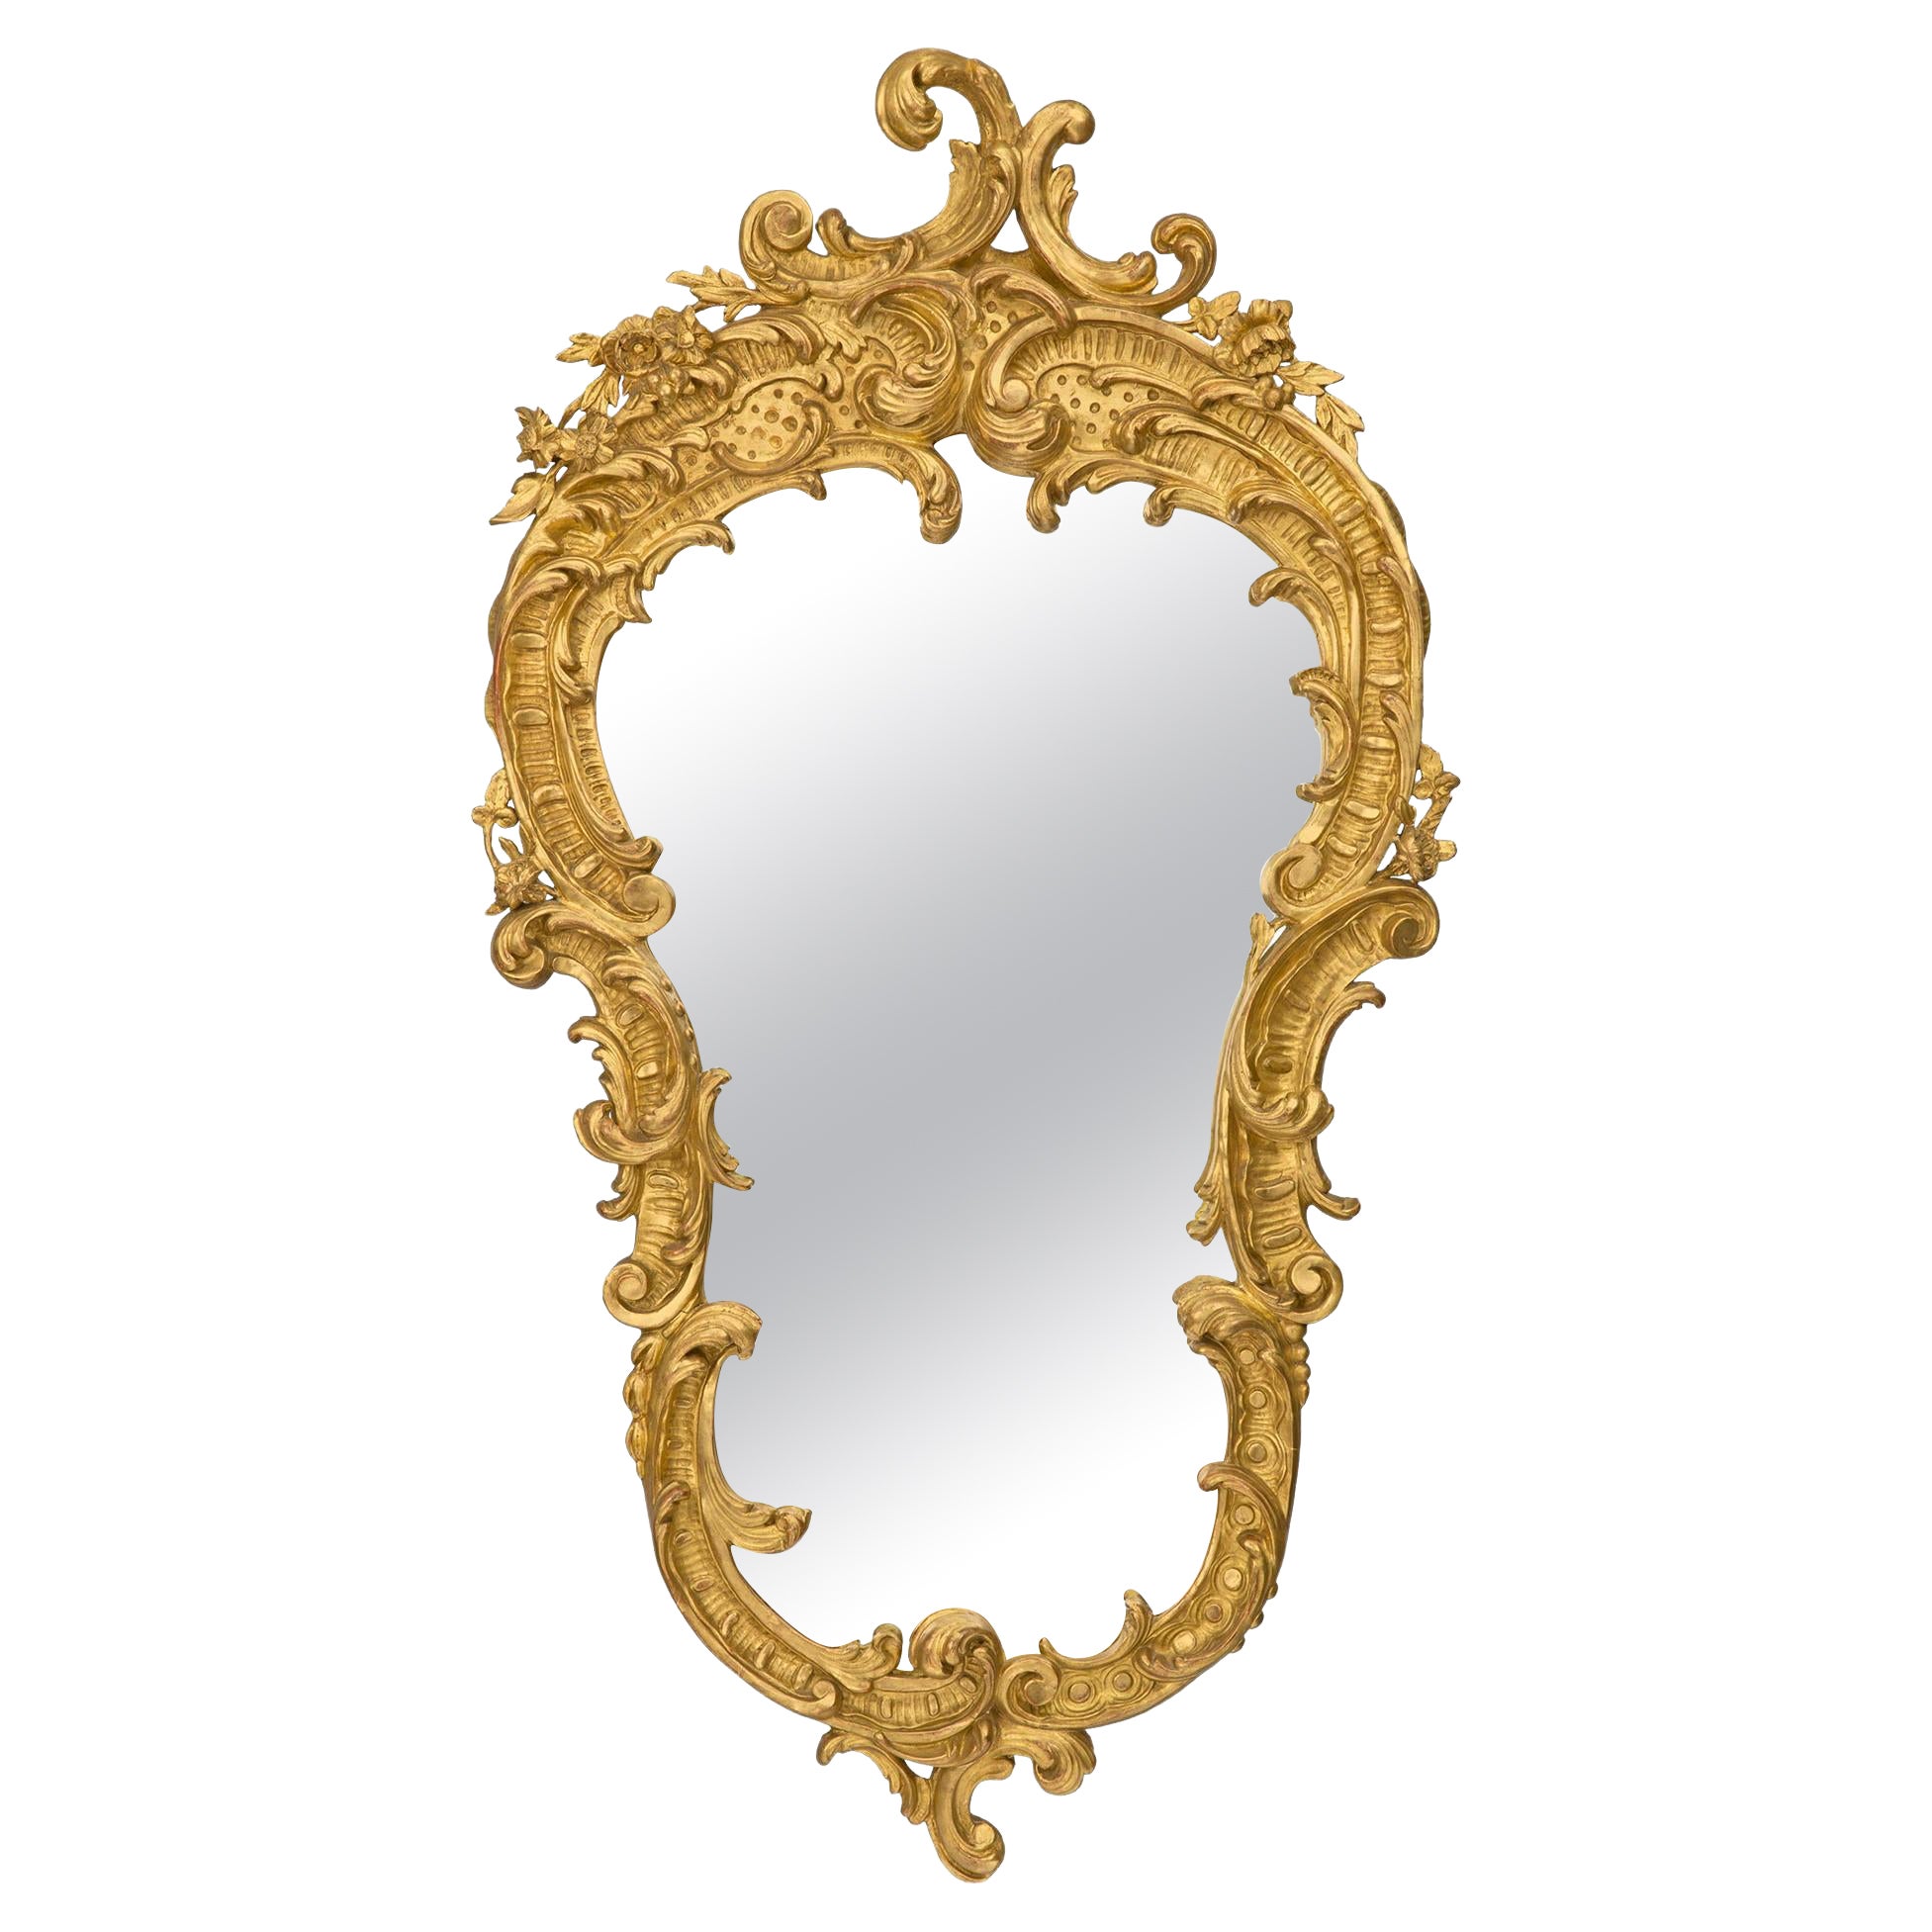 French Mid-19th Century Louis XV St. Giltwood Mirror